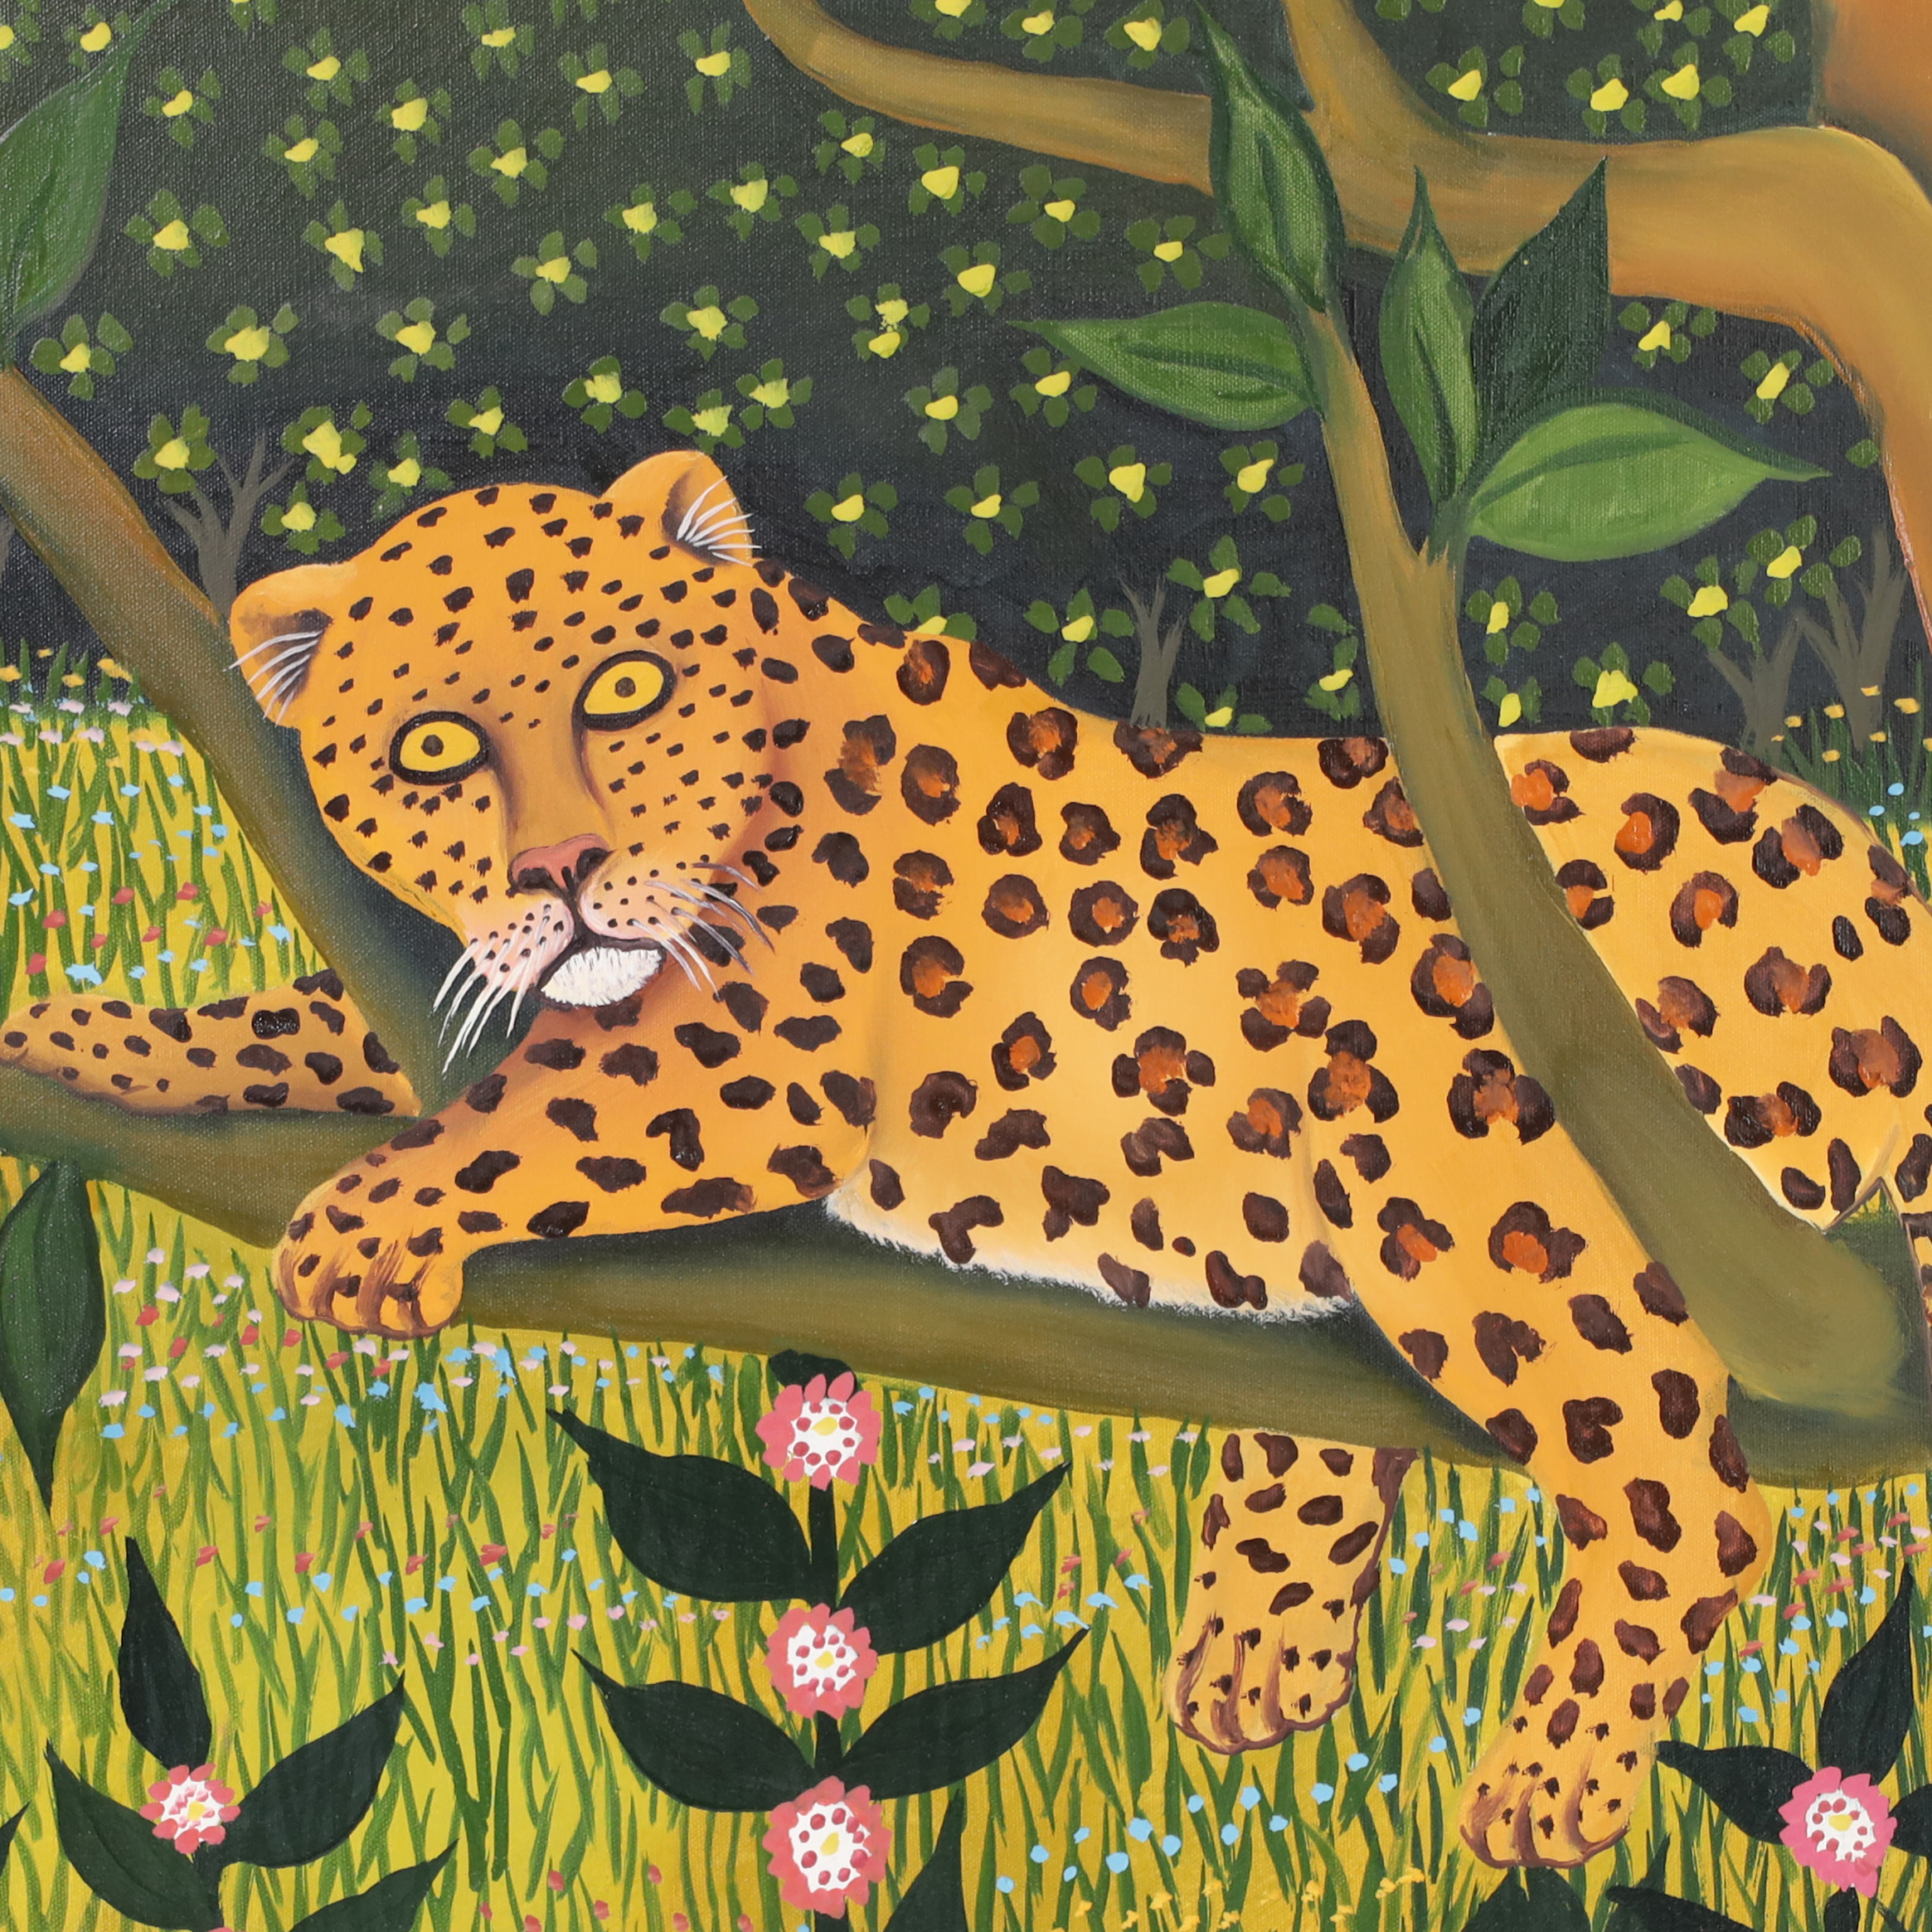 Vintage Painting on Canvas of a Leopard and Parrot in a Jungle Setting